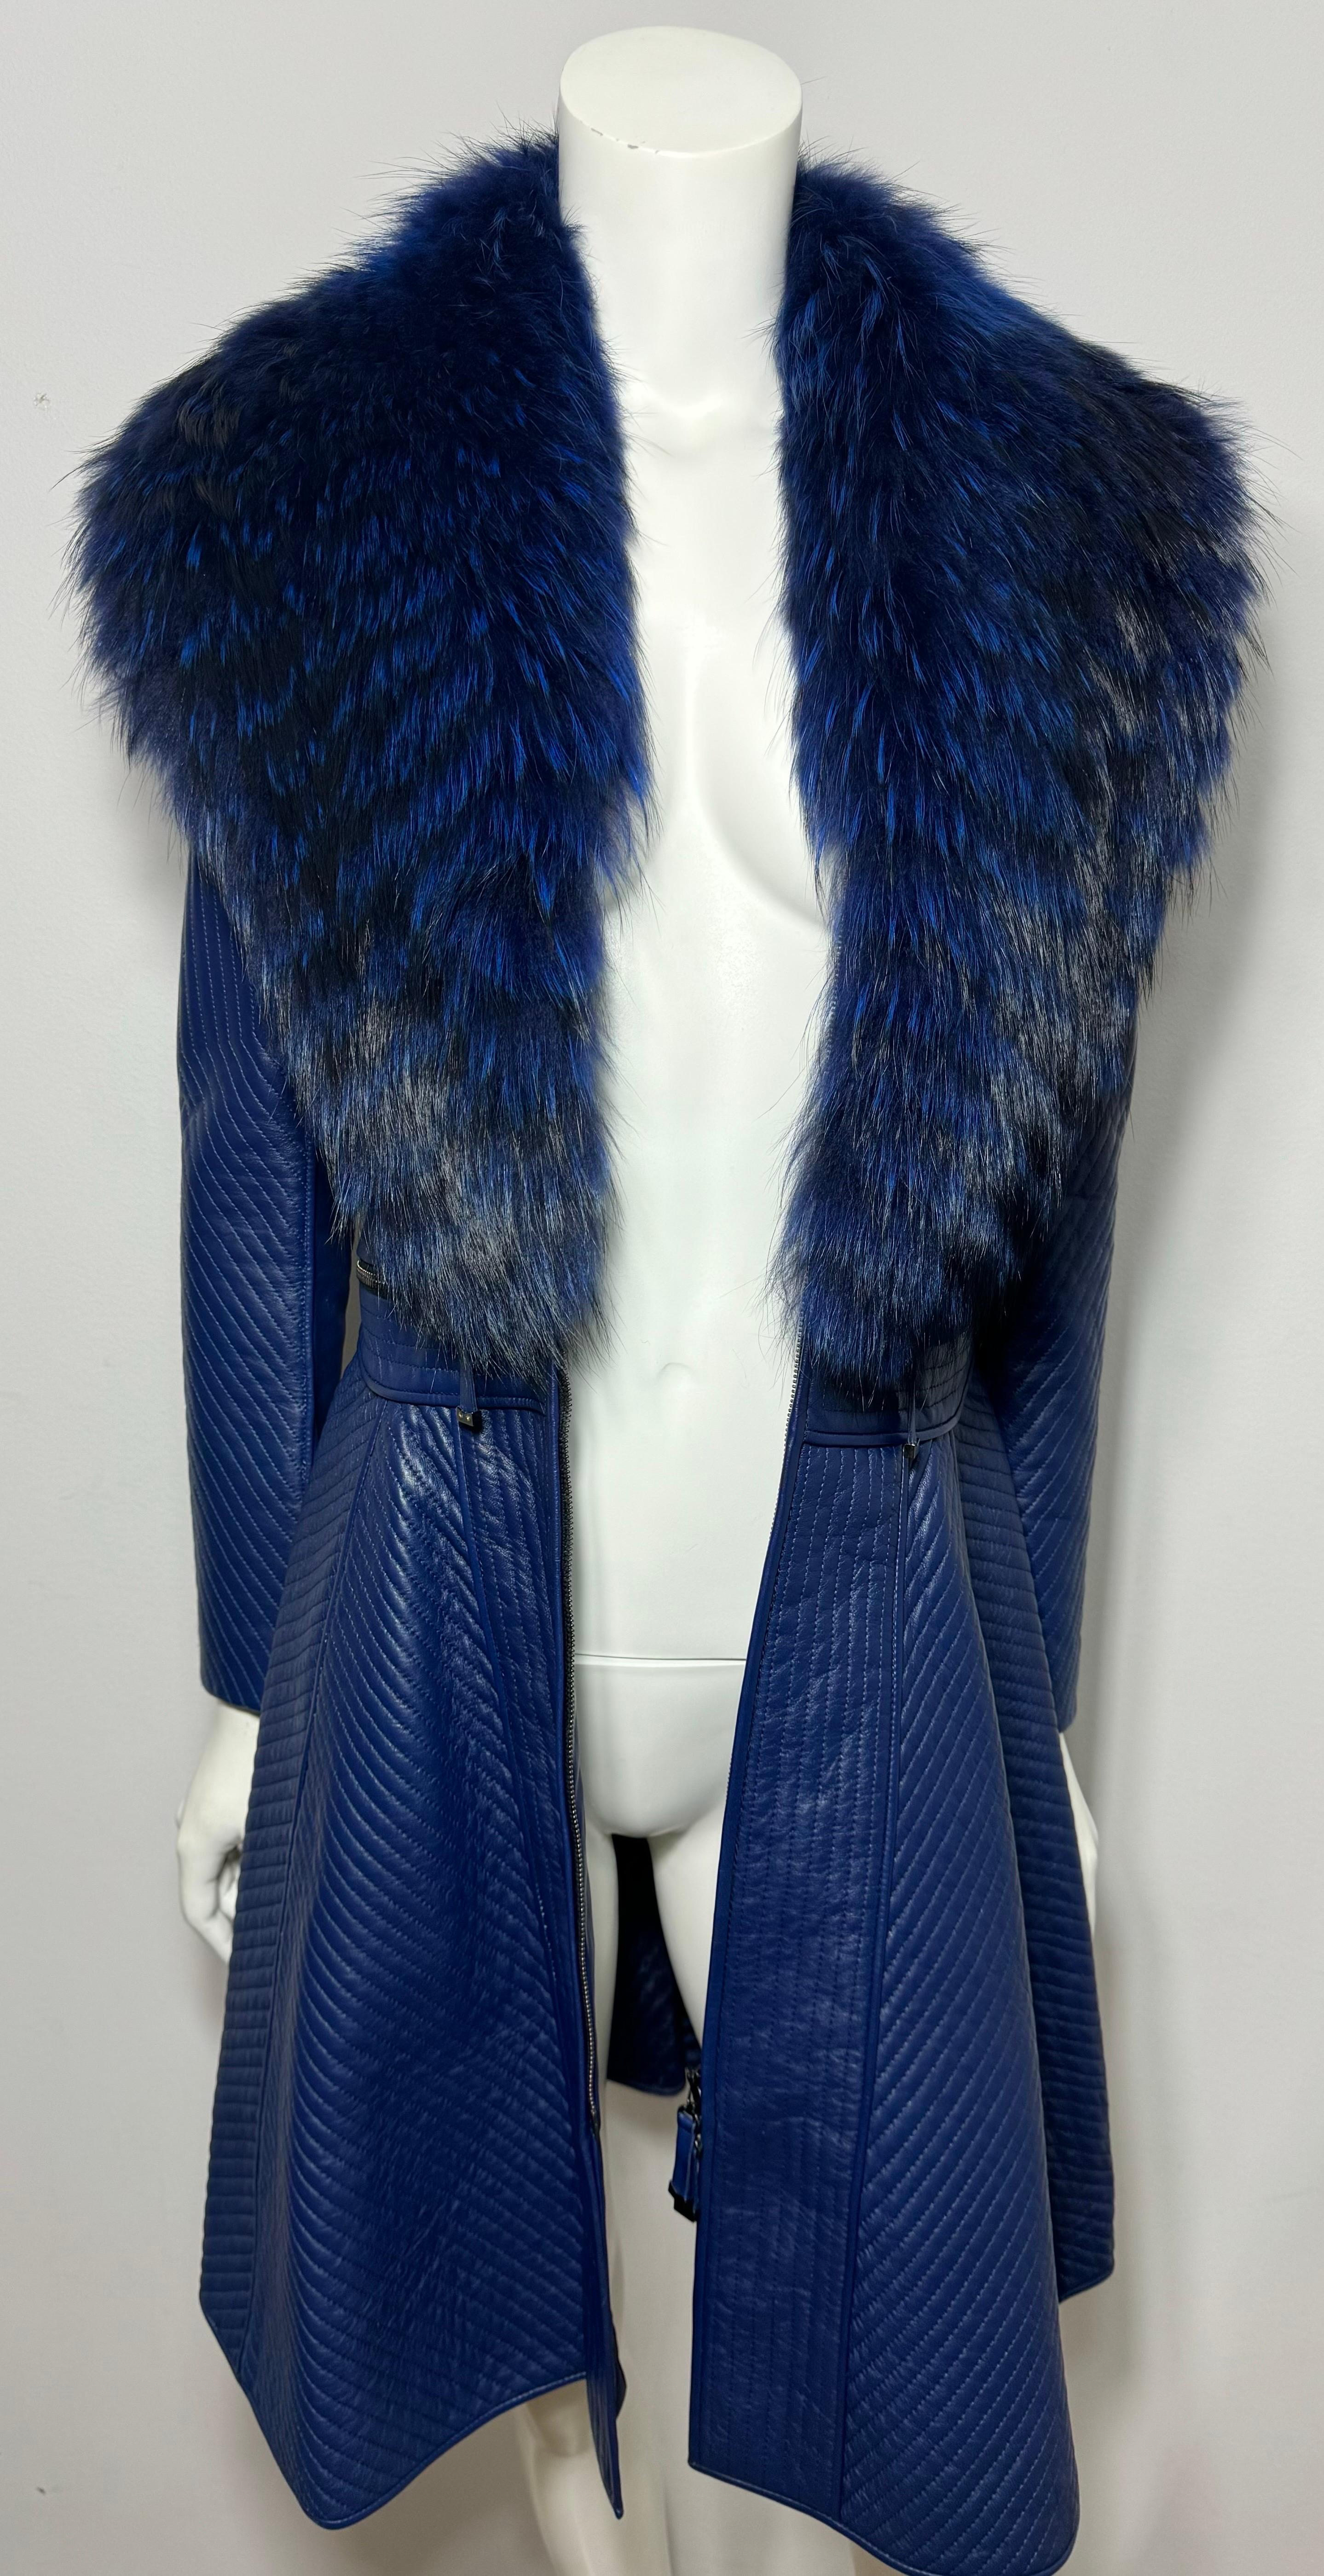 J Mendel Runway Pre Fall 2014 Fur Collar Blue Quilted Leather Coat Dress-Size 4 For Sale 4